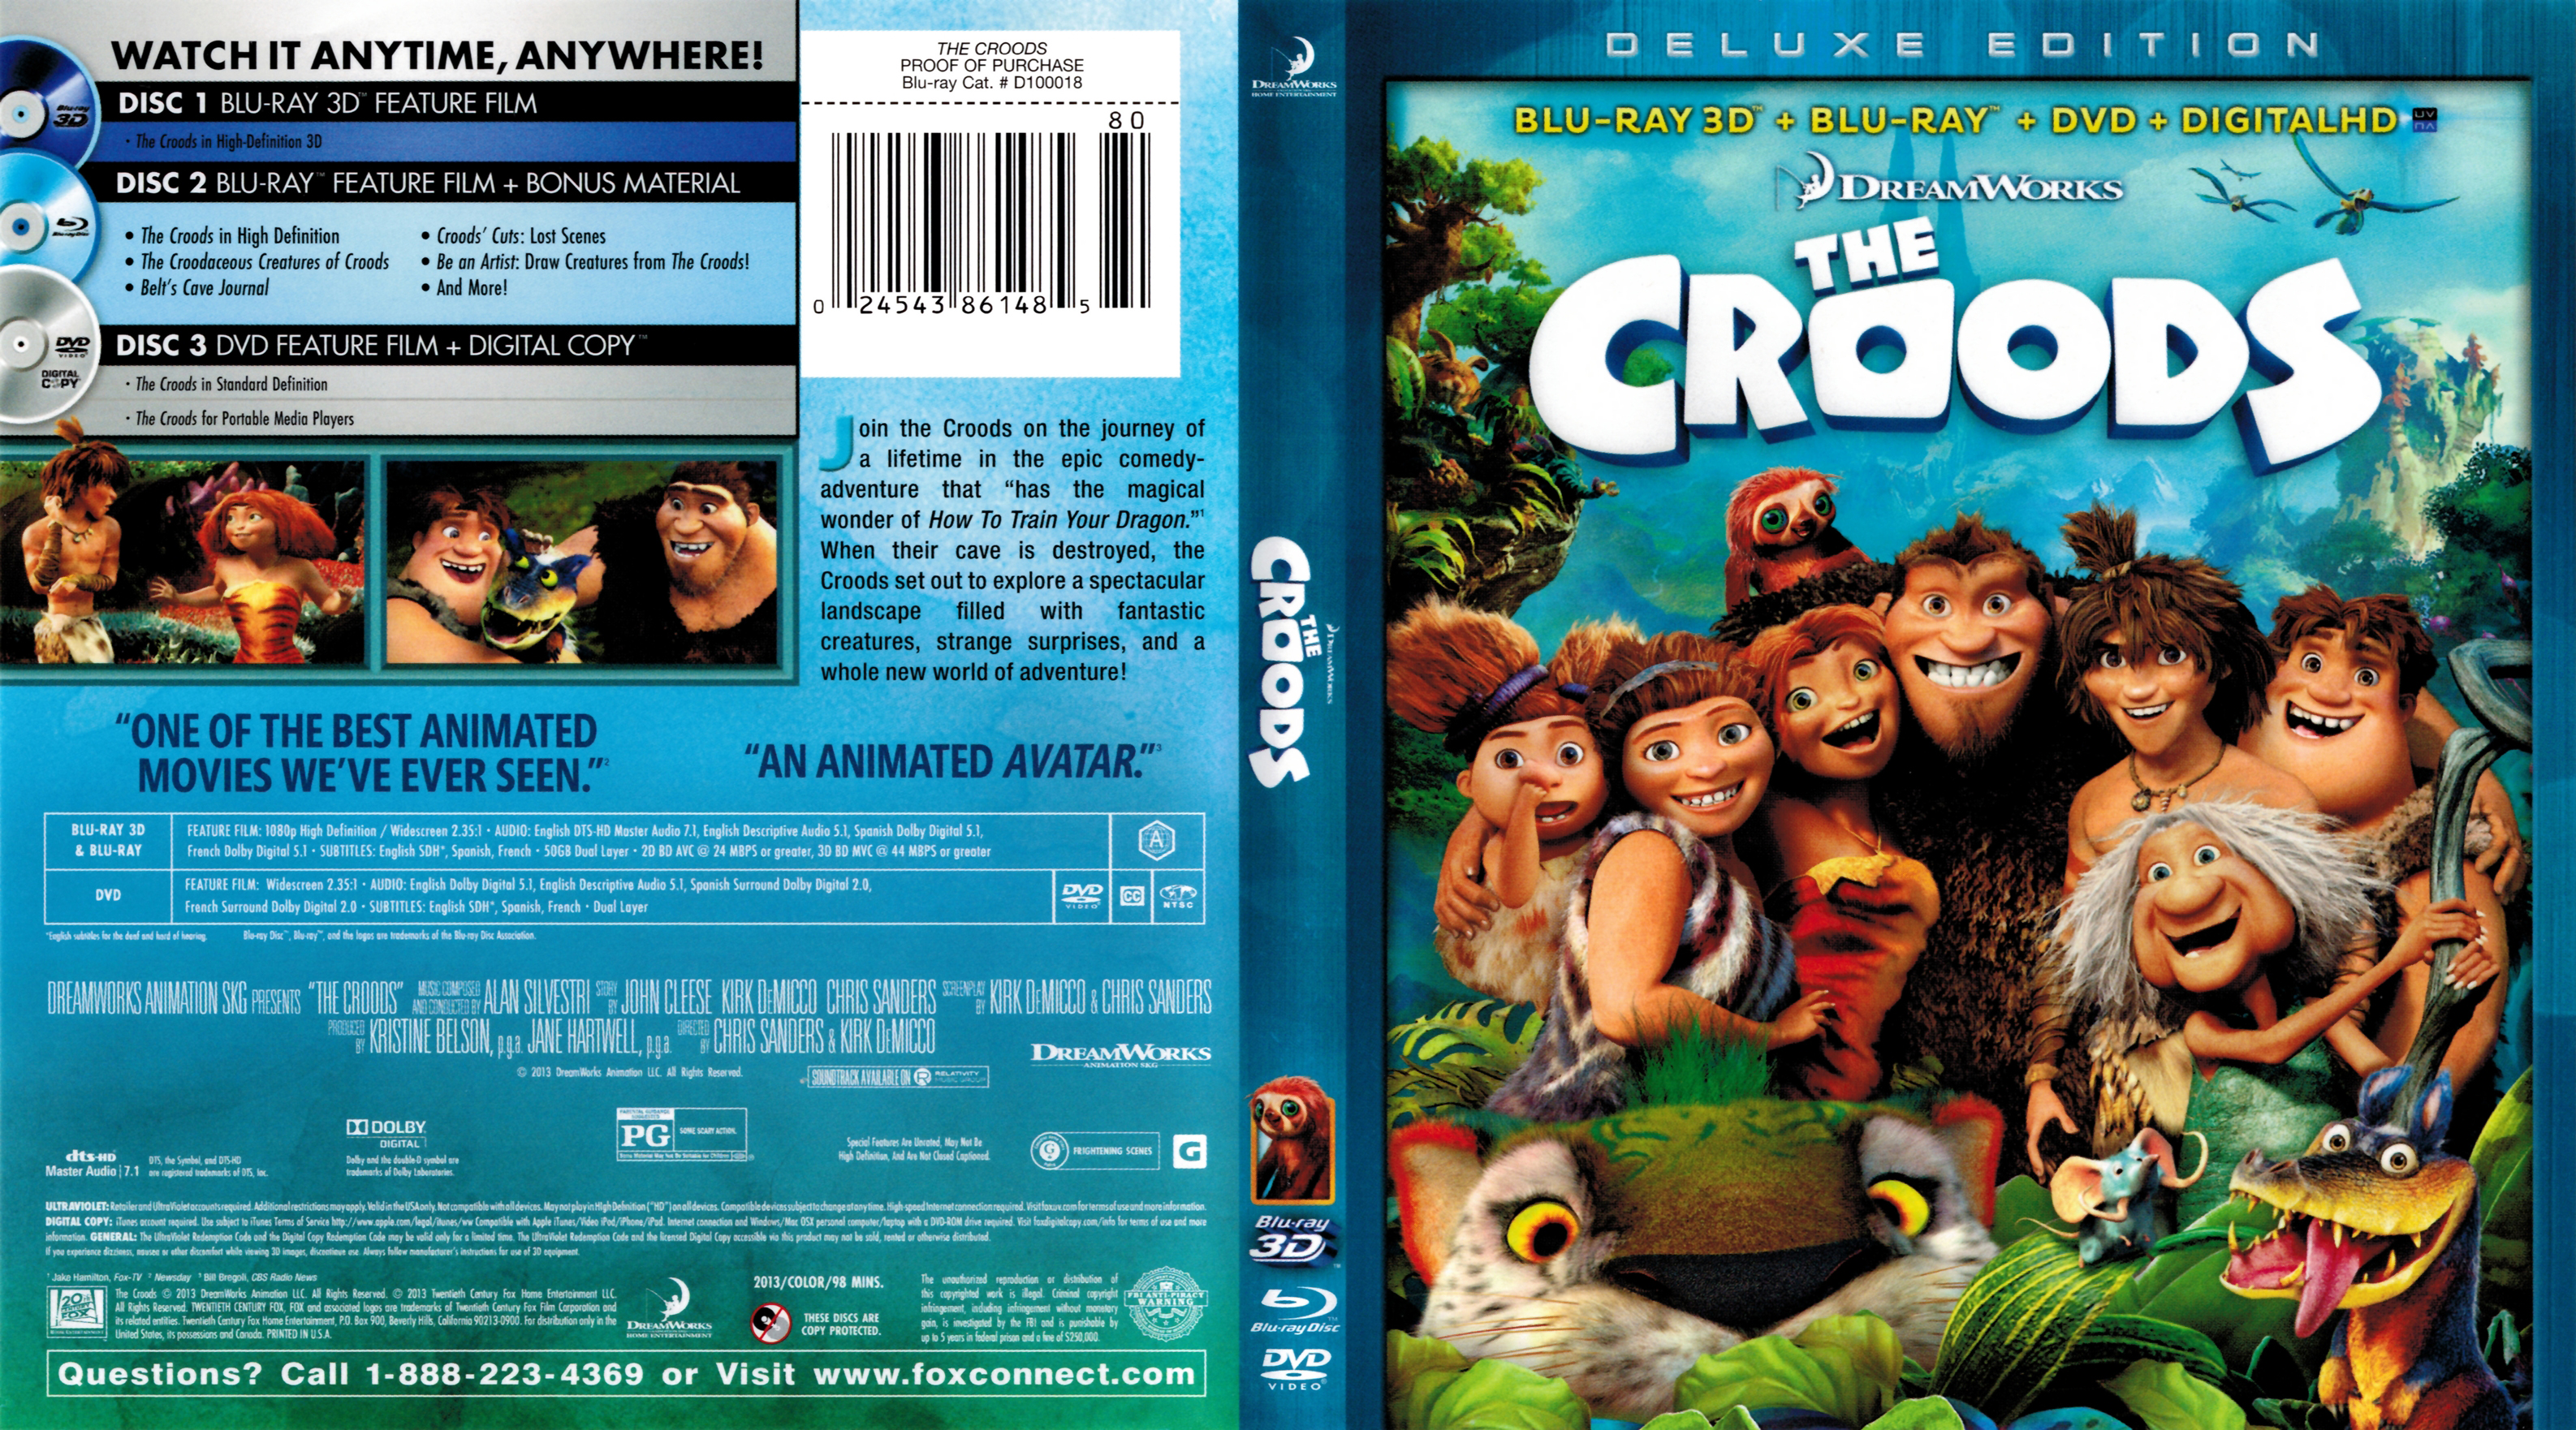 Jaquette DVD Les Croods 3D (BLU-RAY) v2